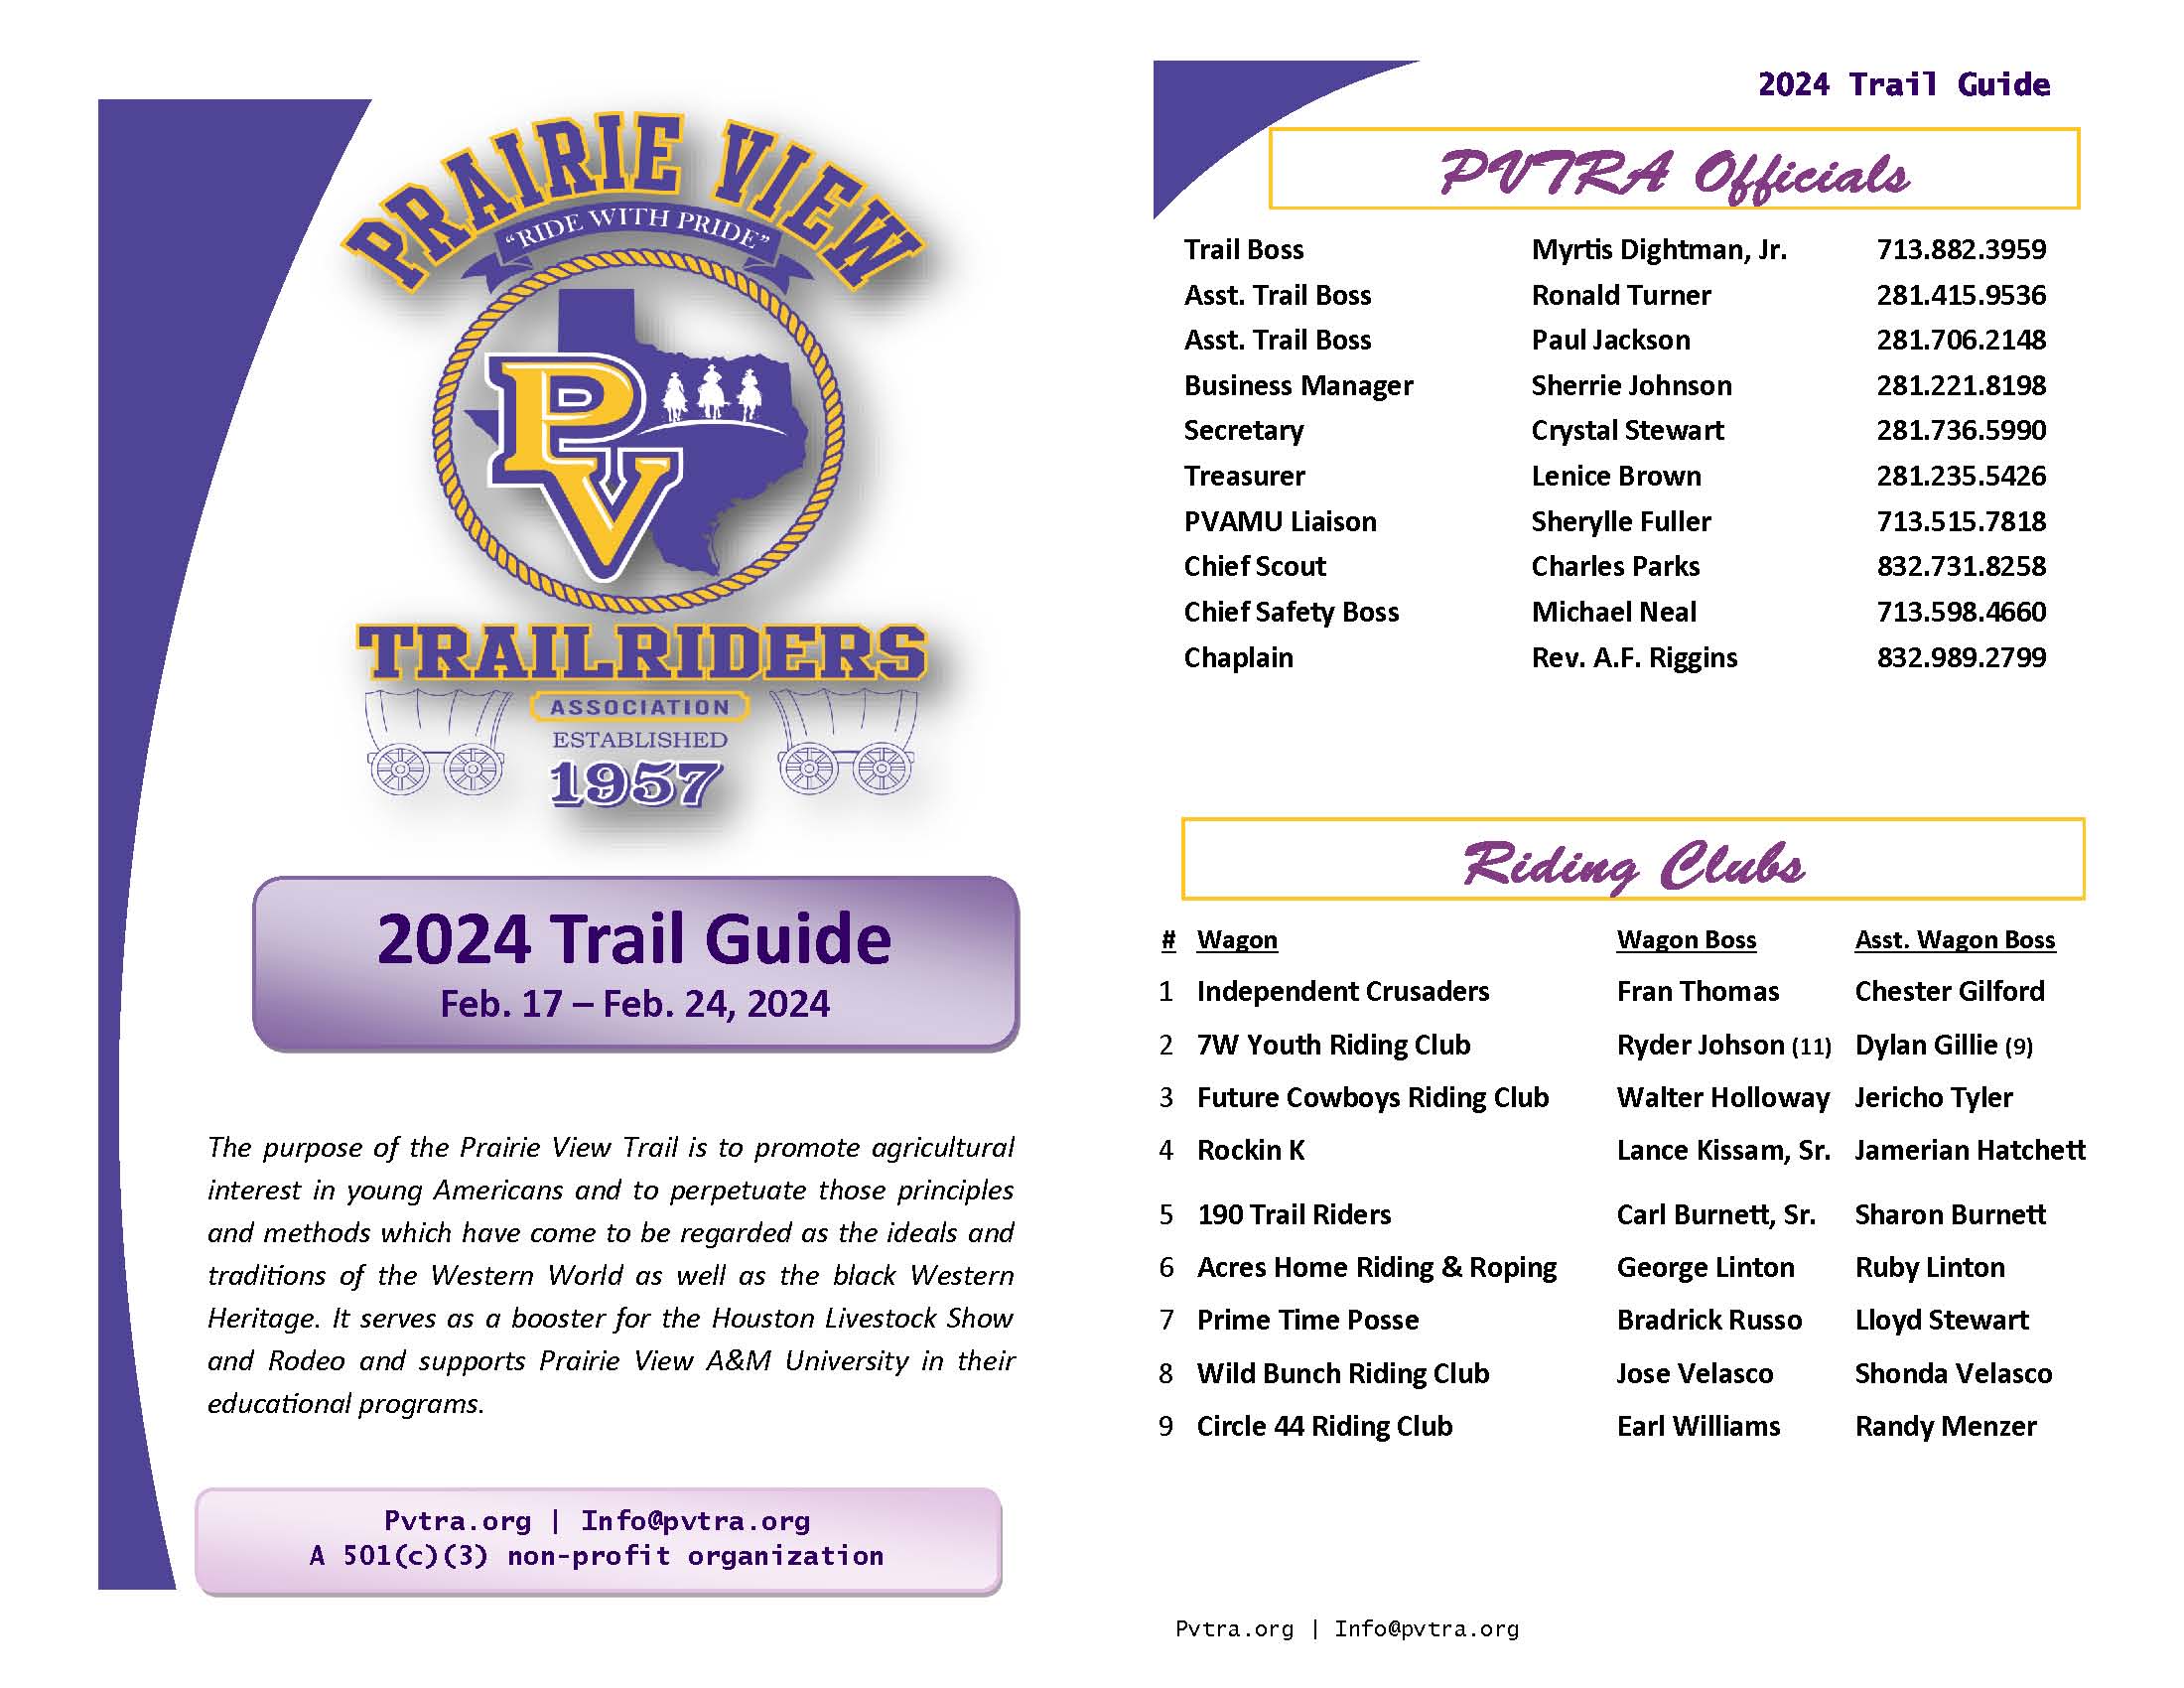 2024 Trail Guide Image